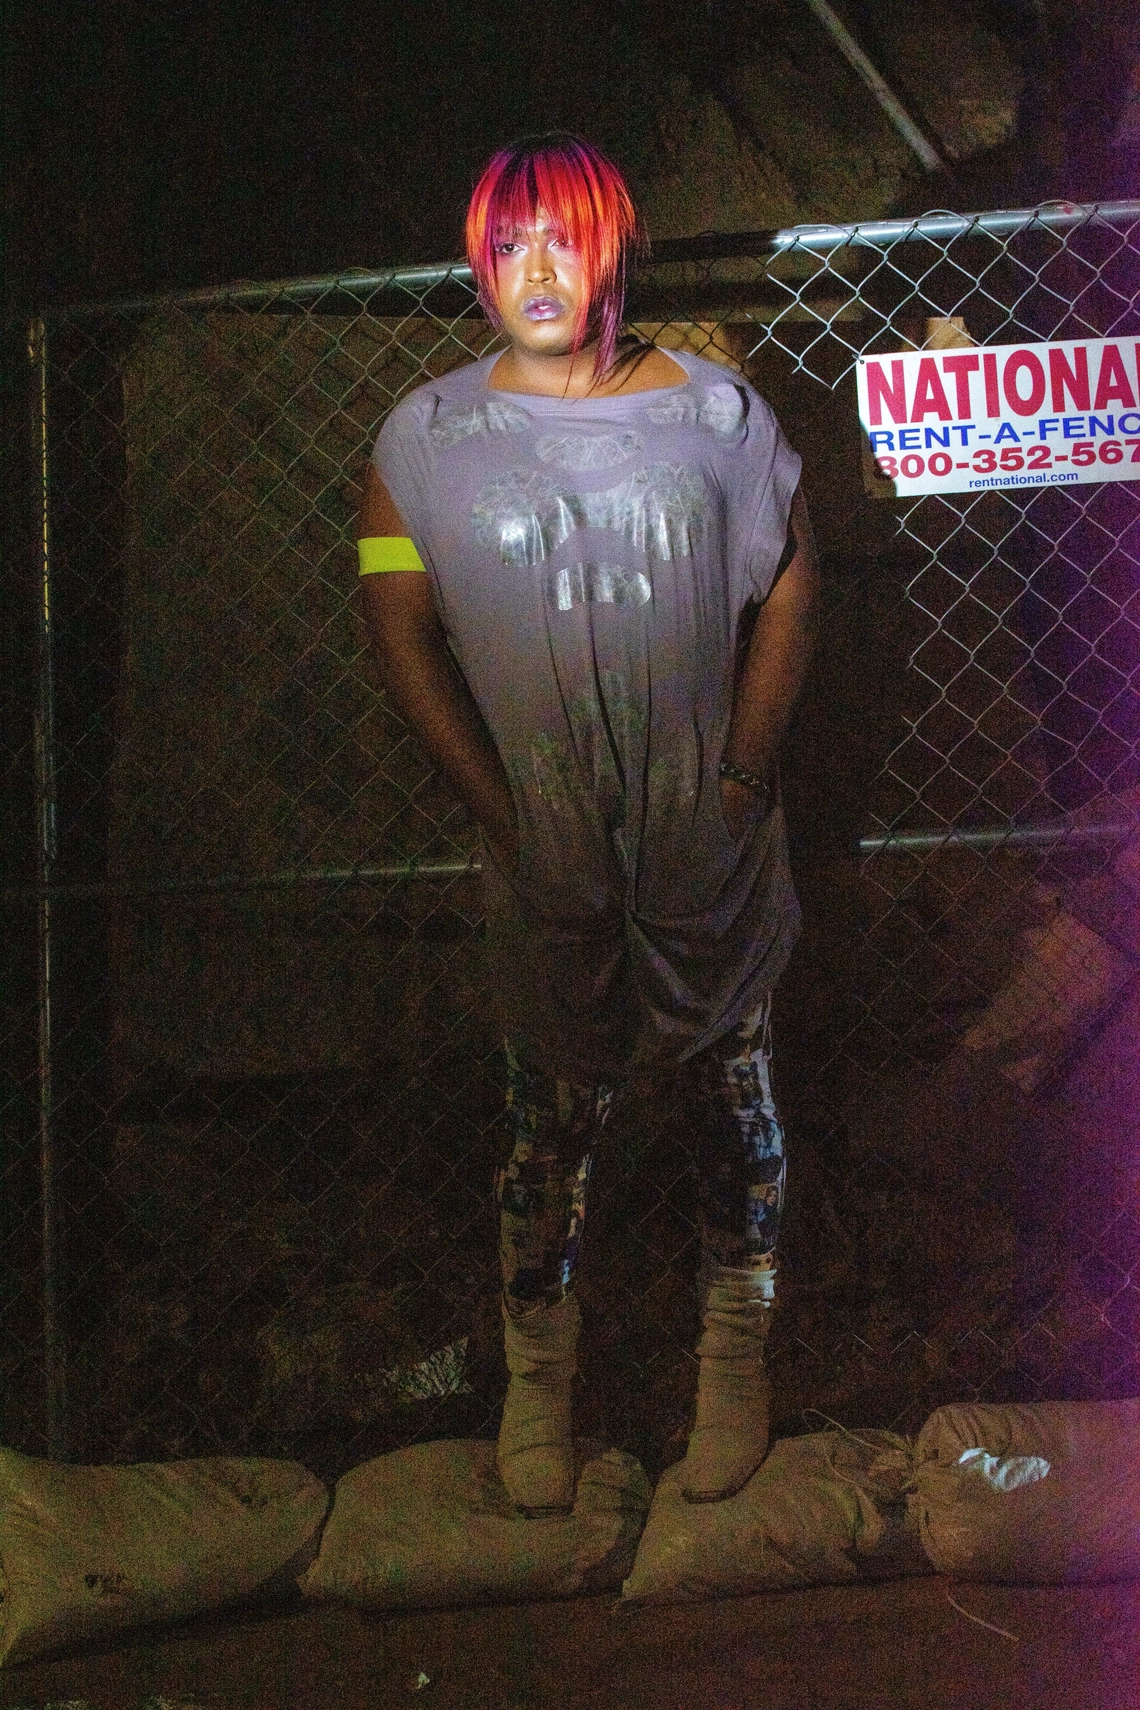 DJ Miss Parker posing with hands in their pockets against a fence illuminated by bright light